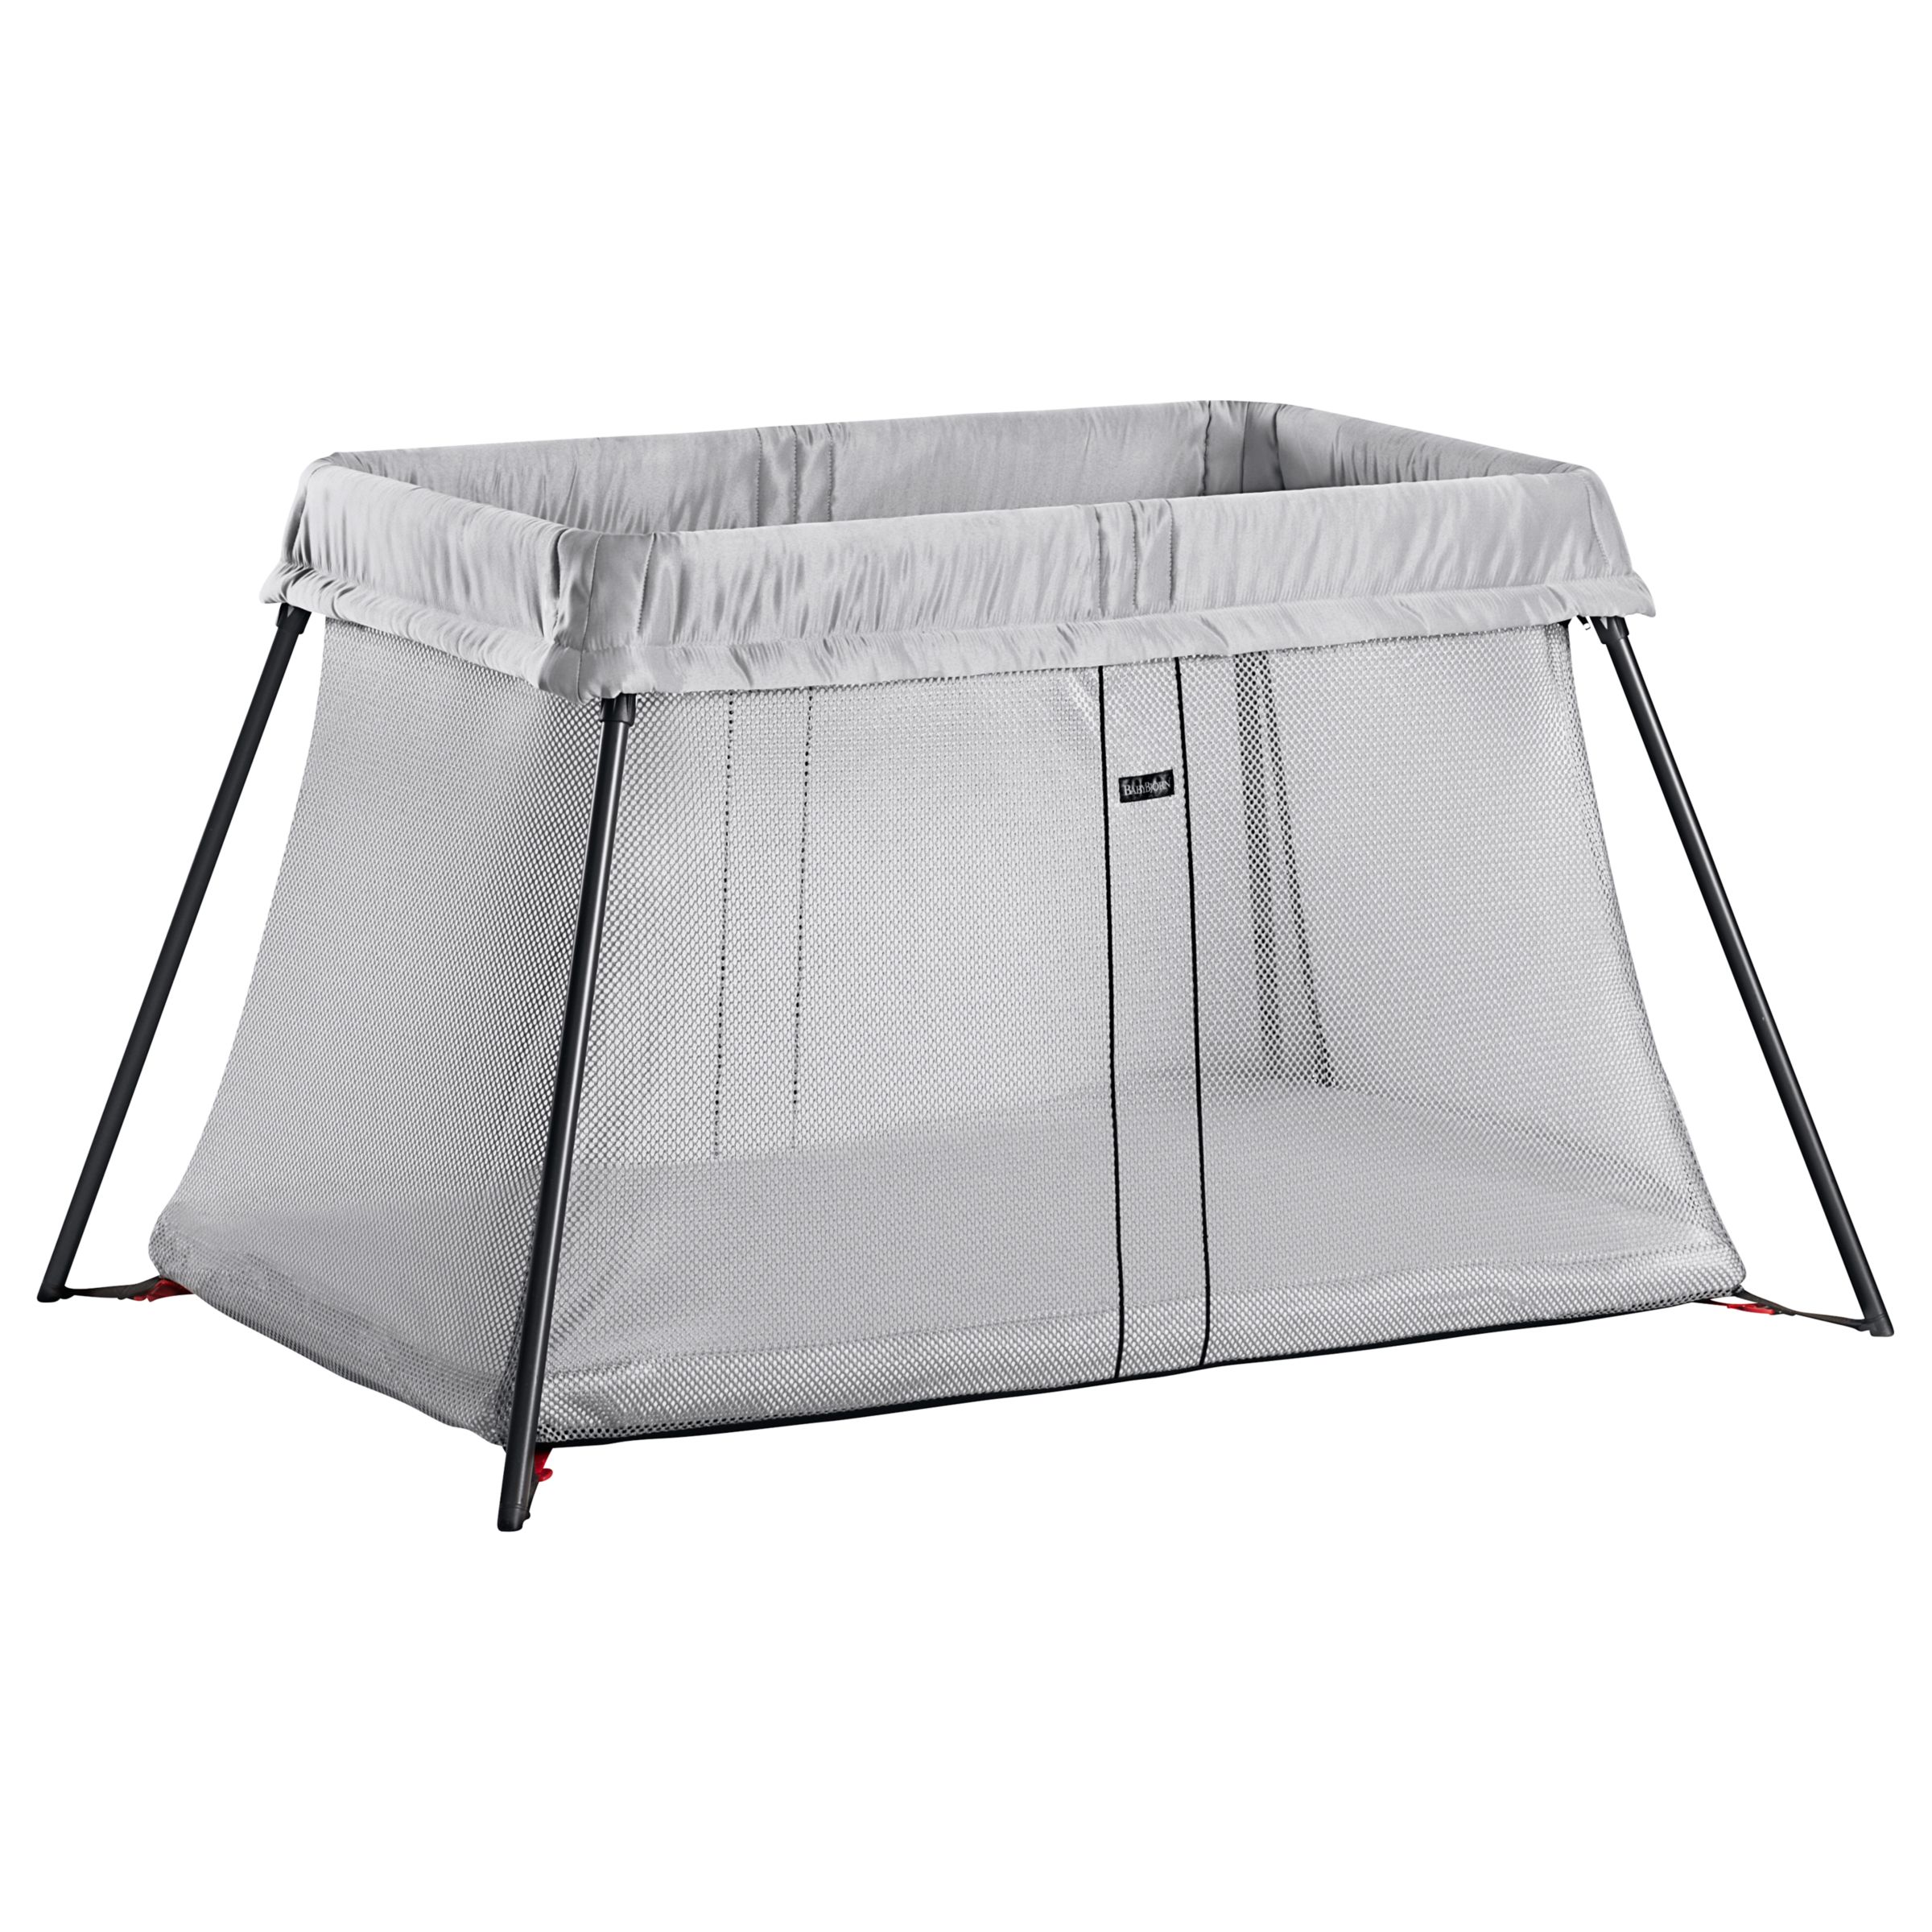 Image of BabyBjrn Travel Cot Light Silver